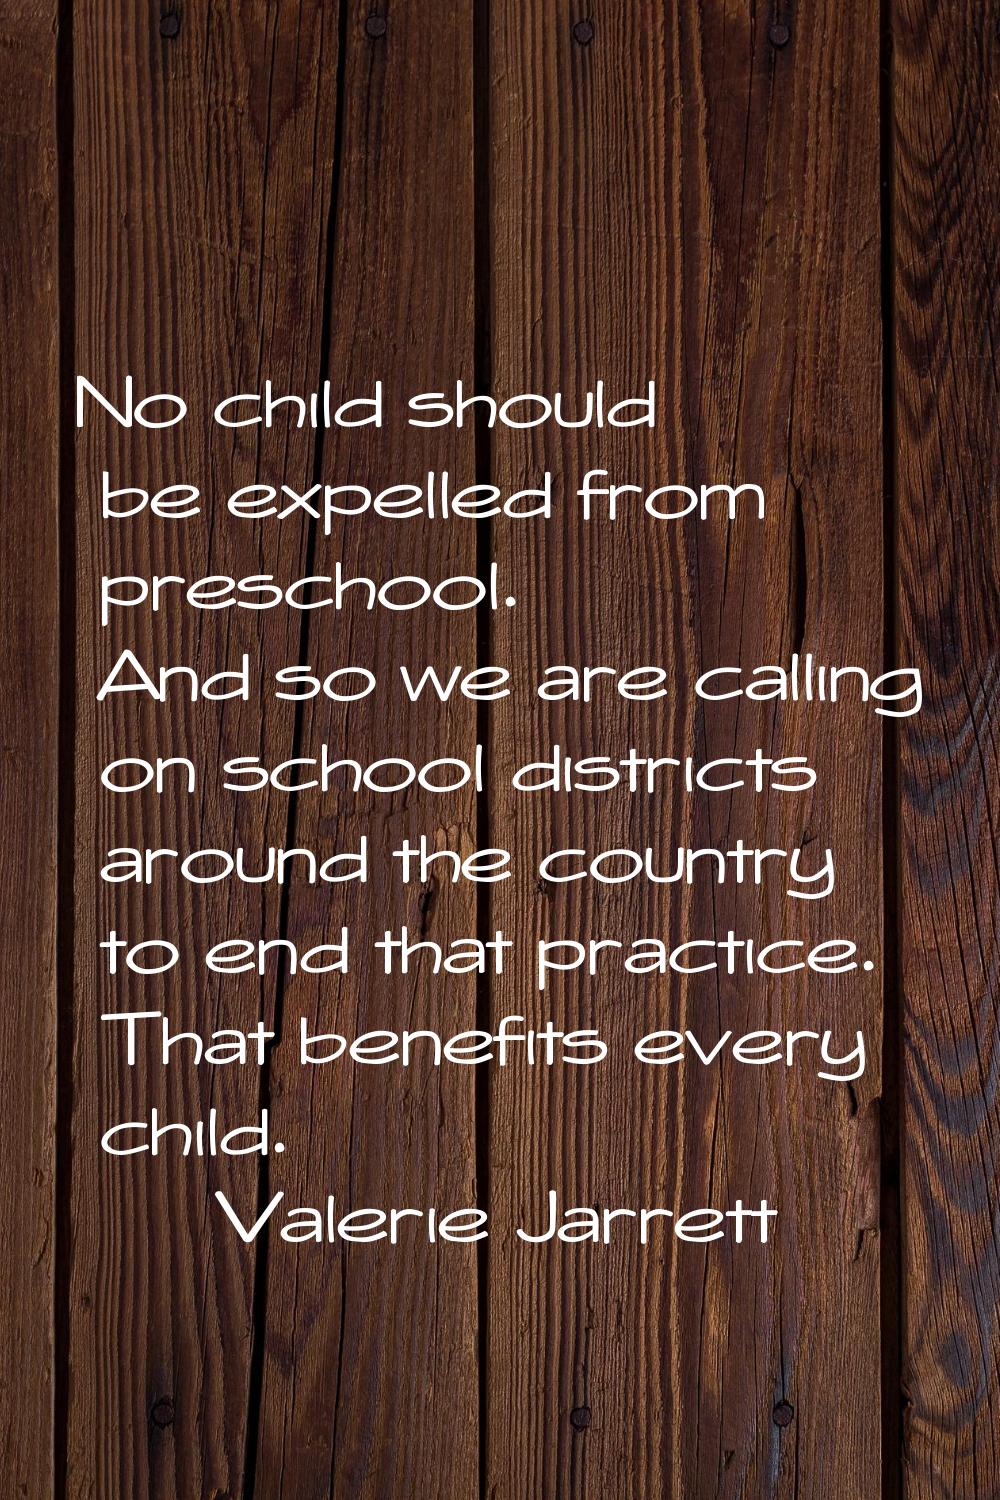 No child should be expelled from preschool. And so we are calling on school districts around the co